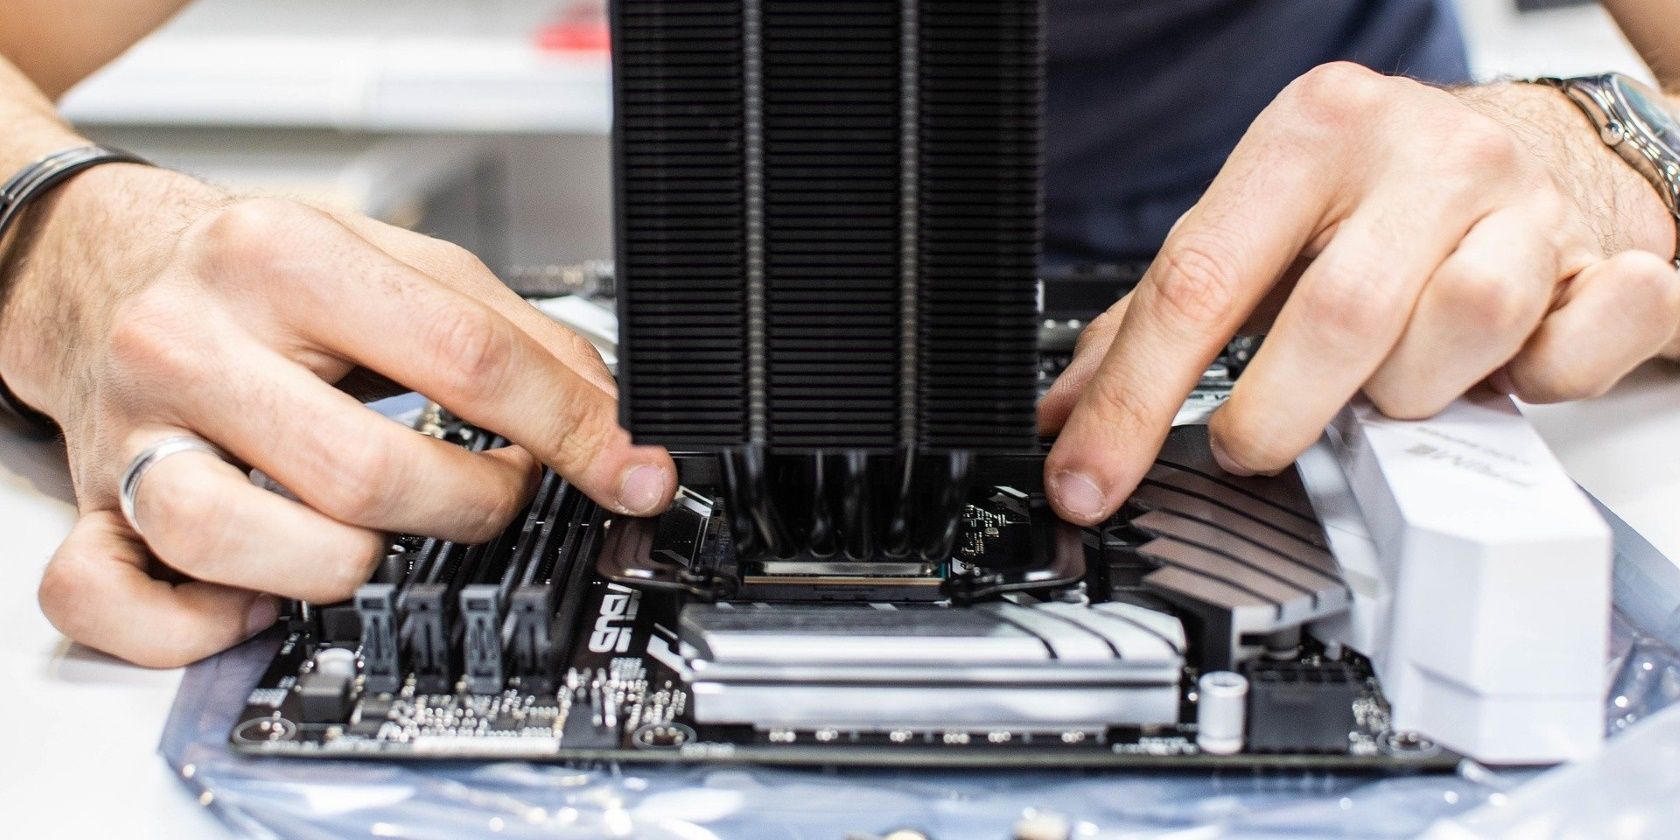 8 Common PC Building Mistakes Beginners Make—and How to Avoid Them